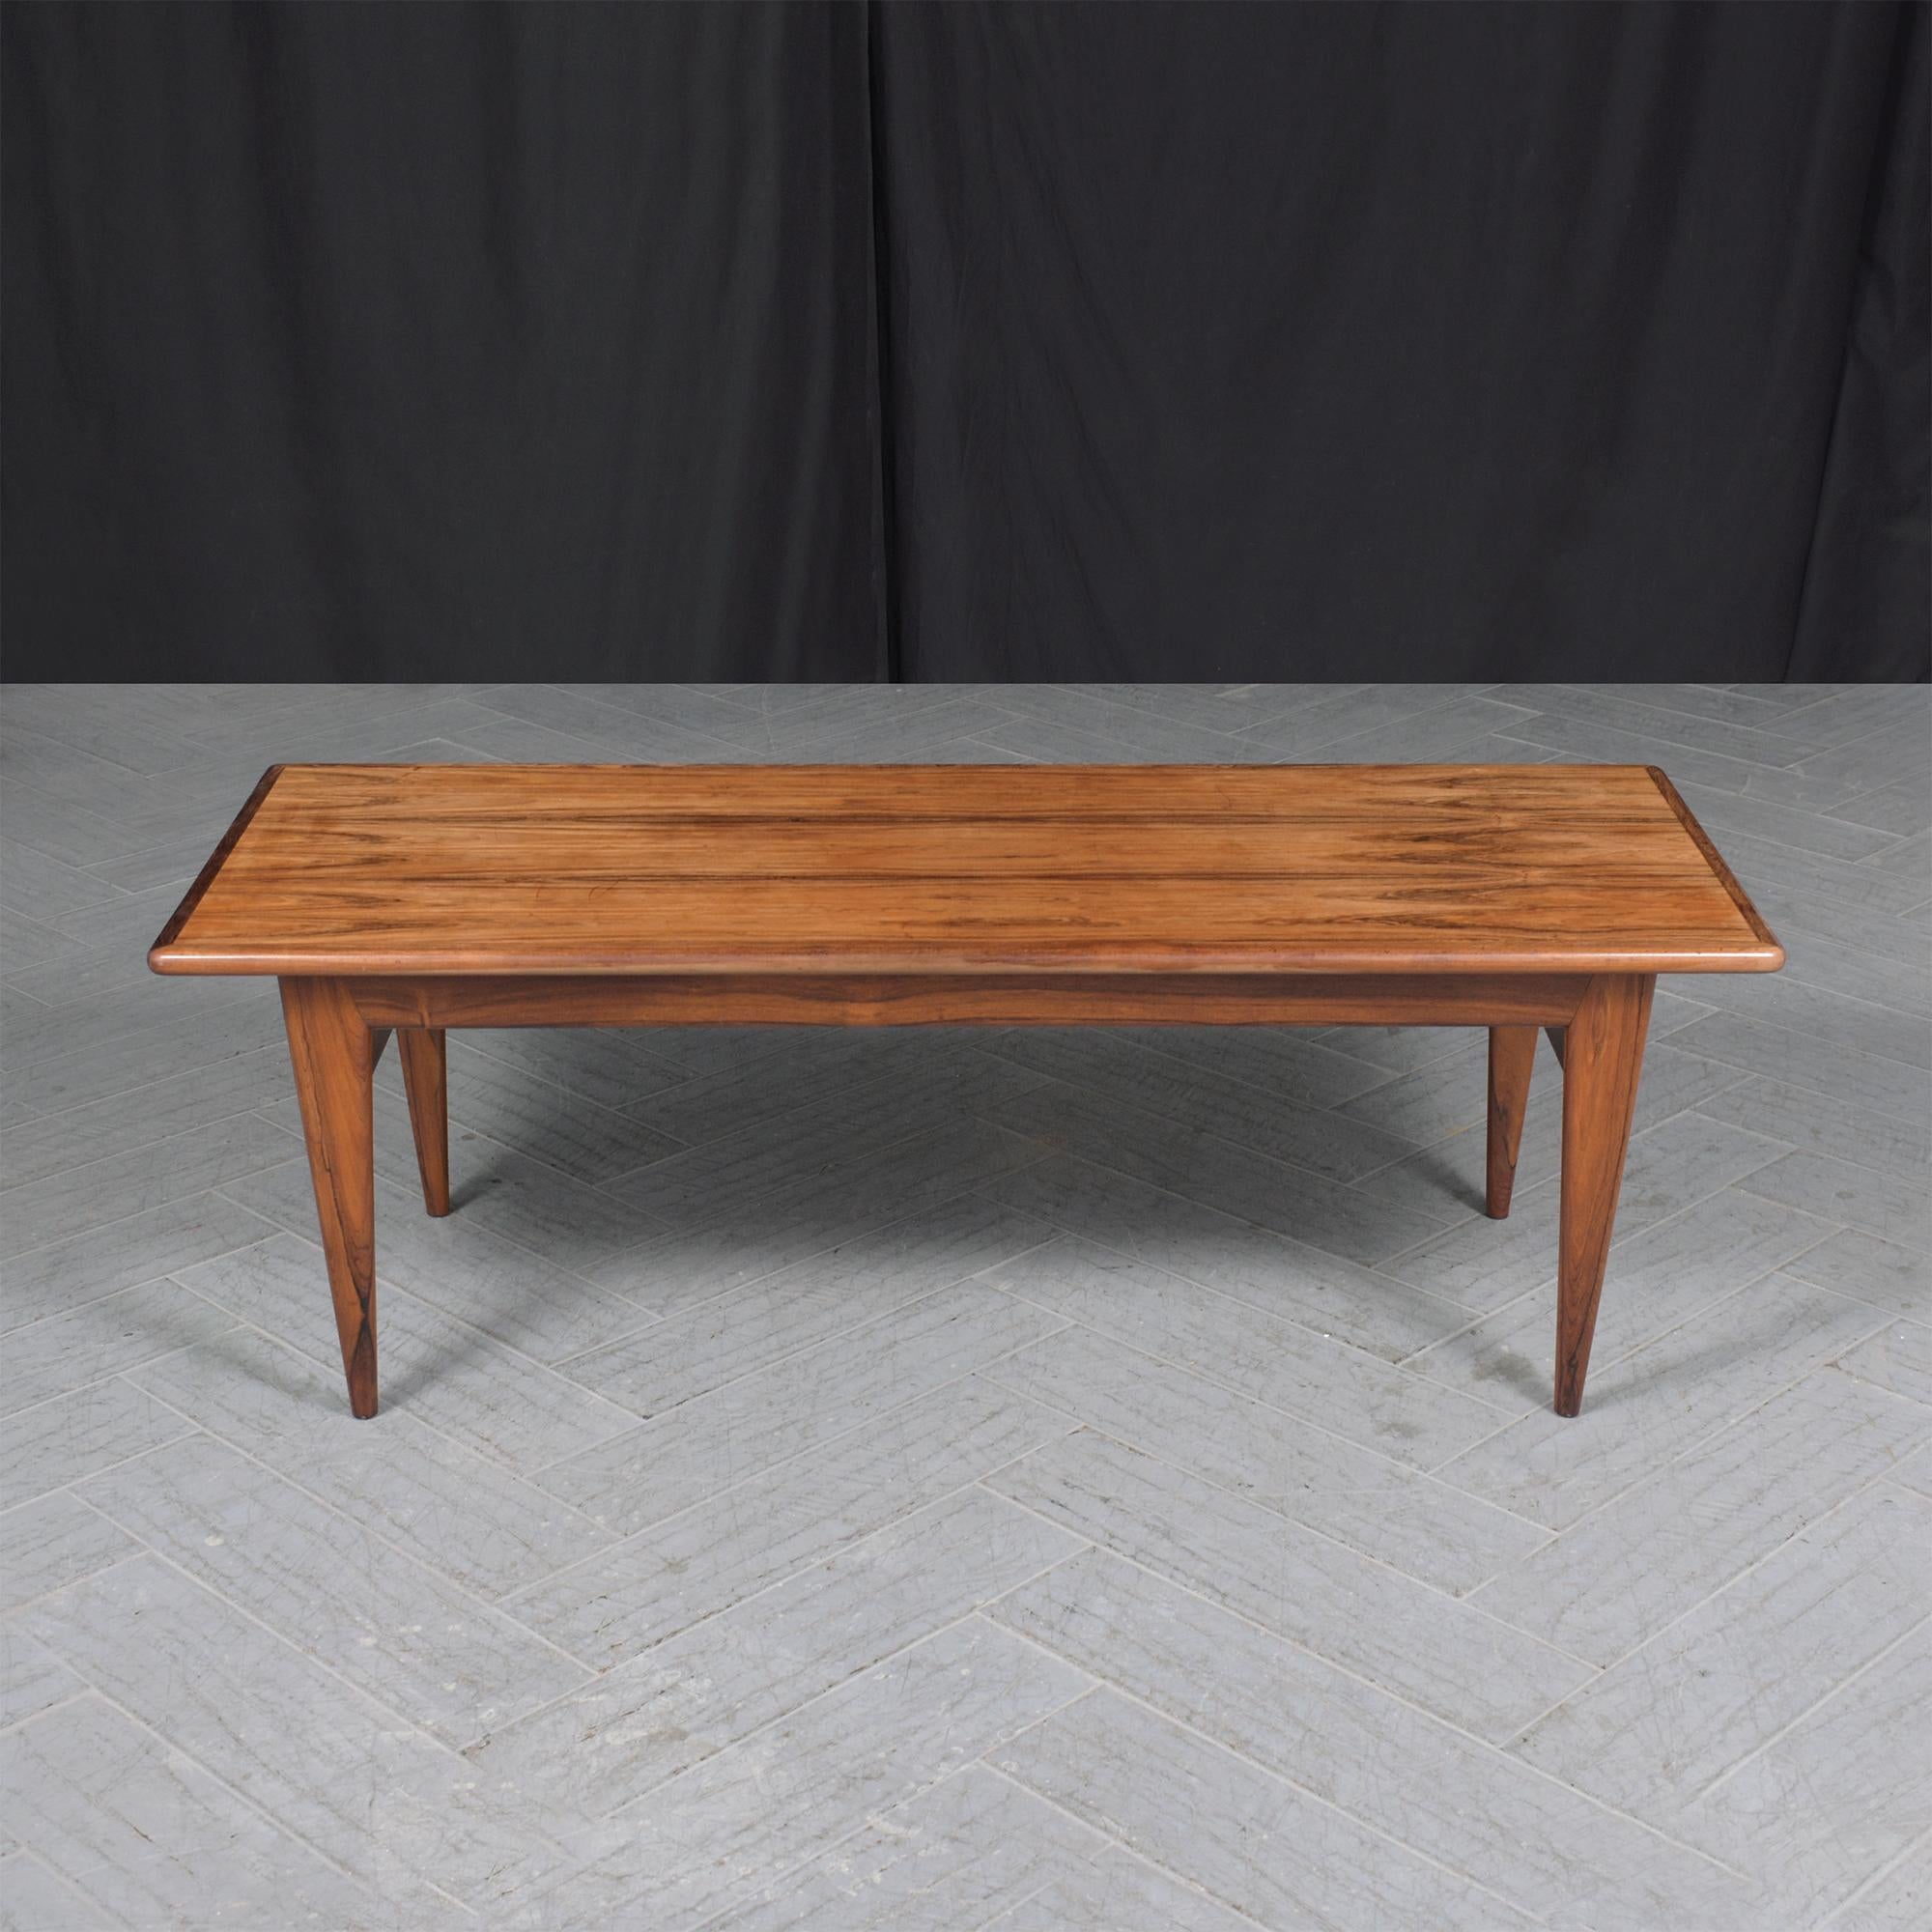 Carved Modern Scandinavian Rosewood Coffee Table: Mid-Century Elegance For Sale